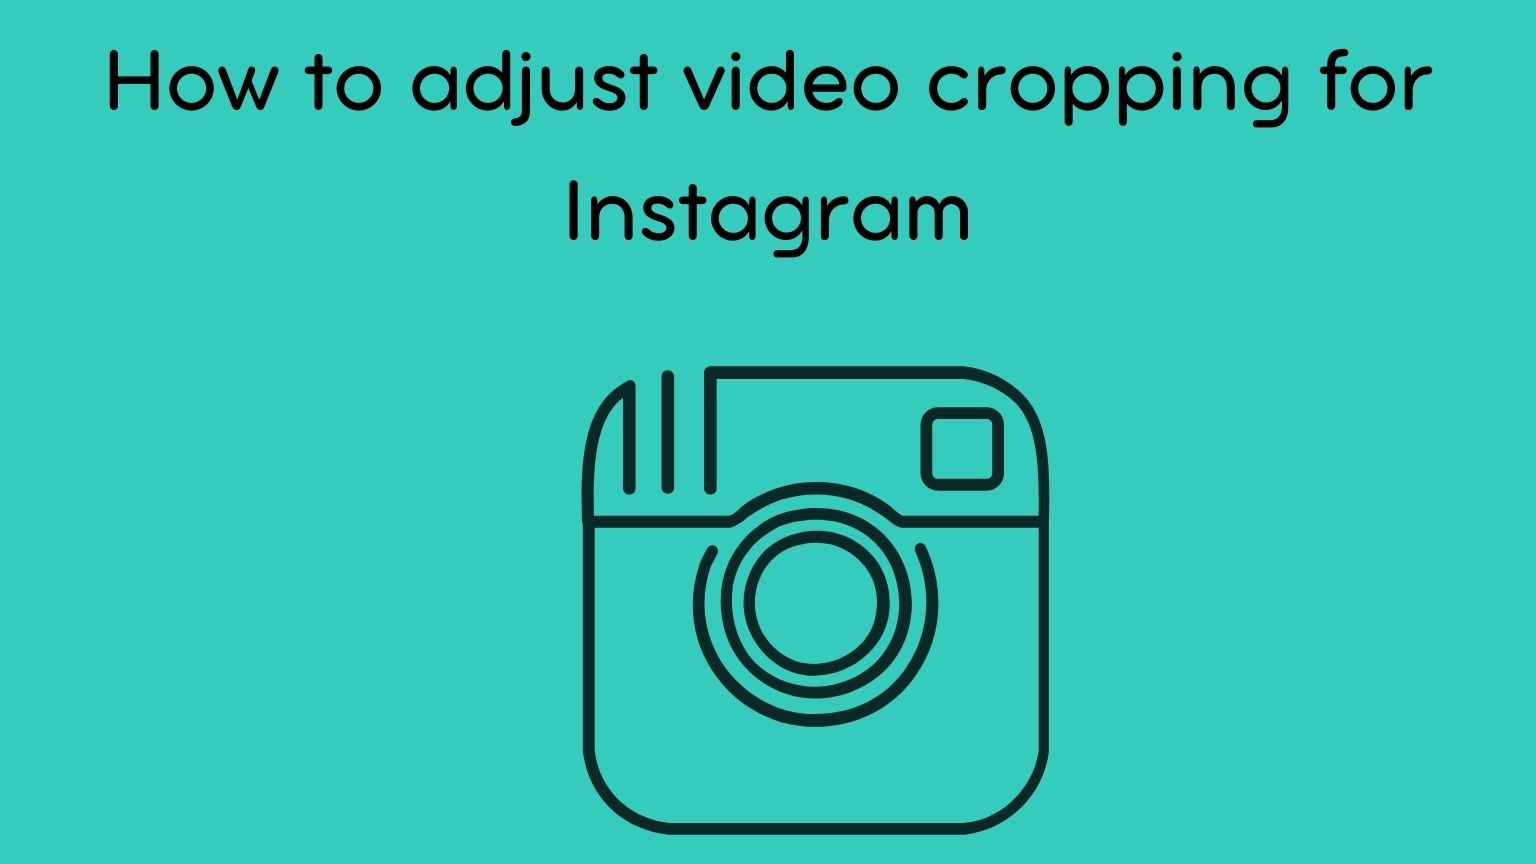 How to adjust video cropping for Instagram